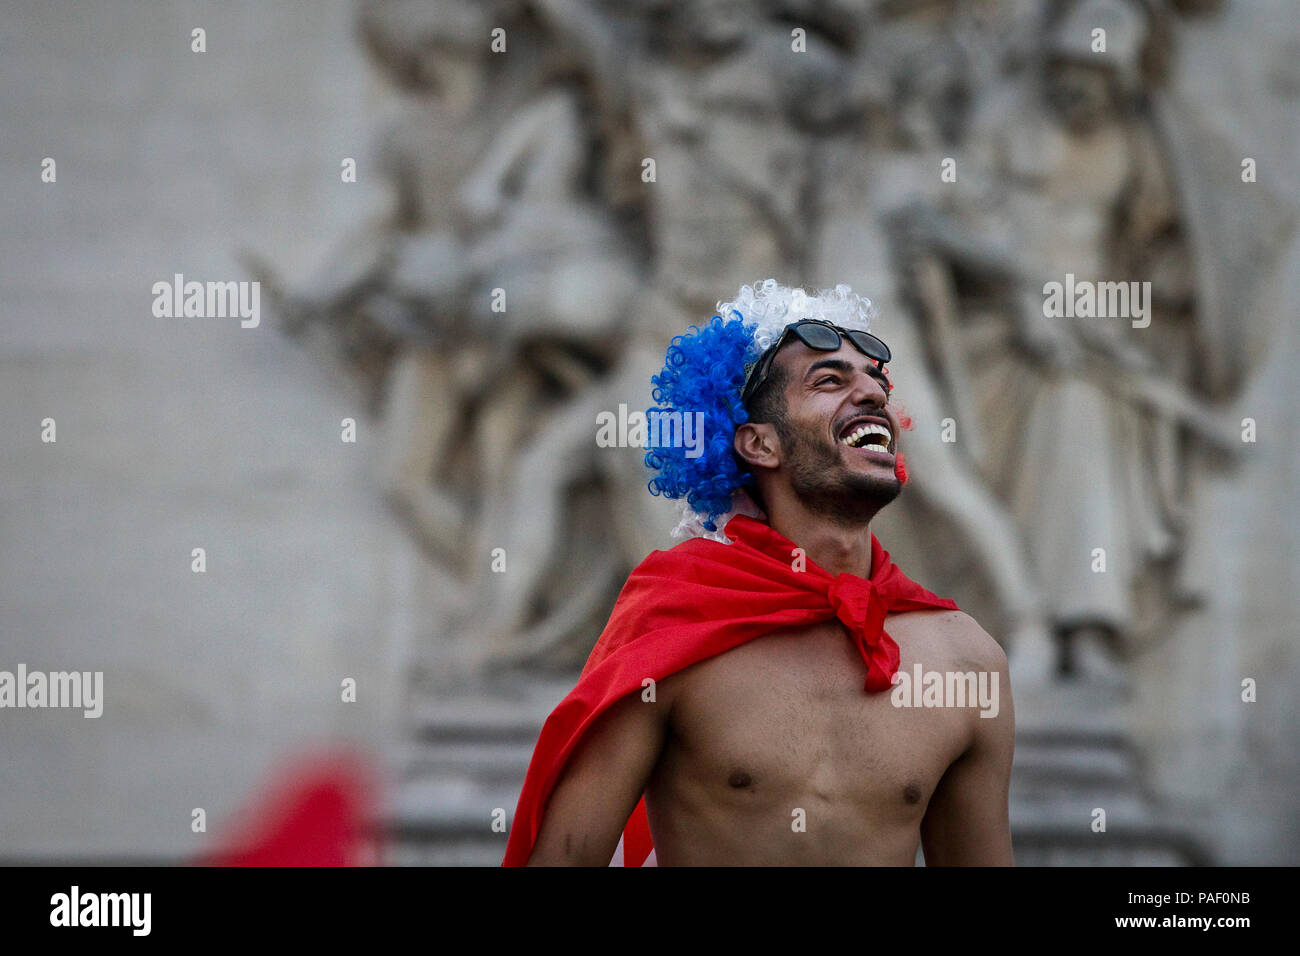 French fans celebrate on the Champs-Elysees avenue after France won the World Cup against Croatia, Paris, France, July 15, 2018. Stock Photo